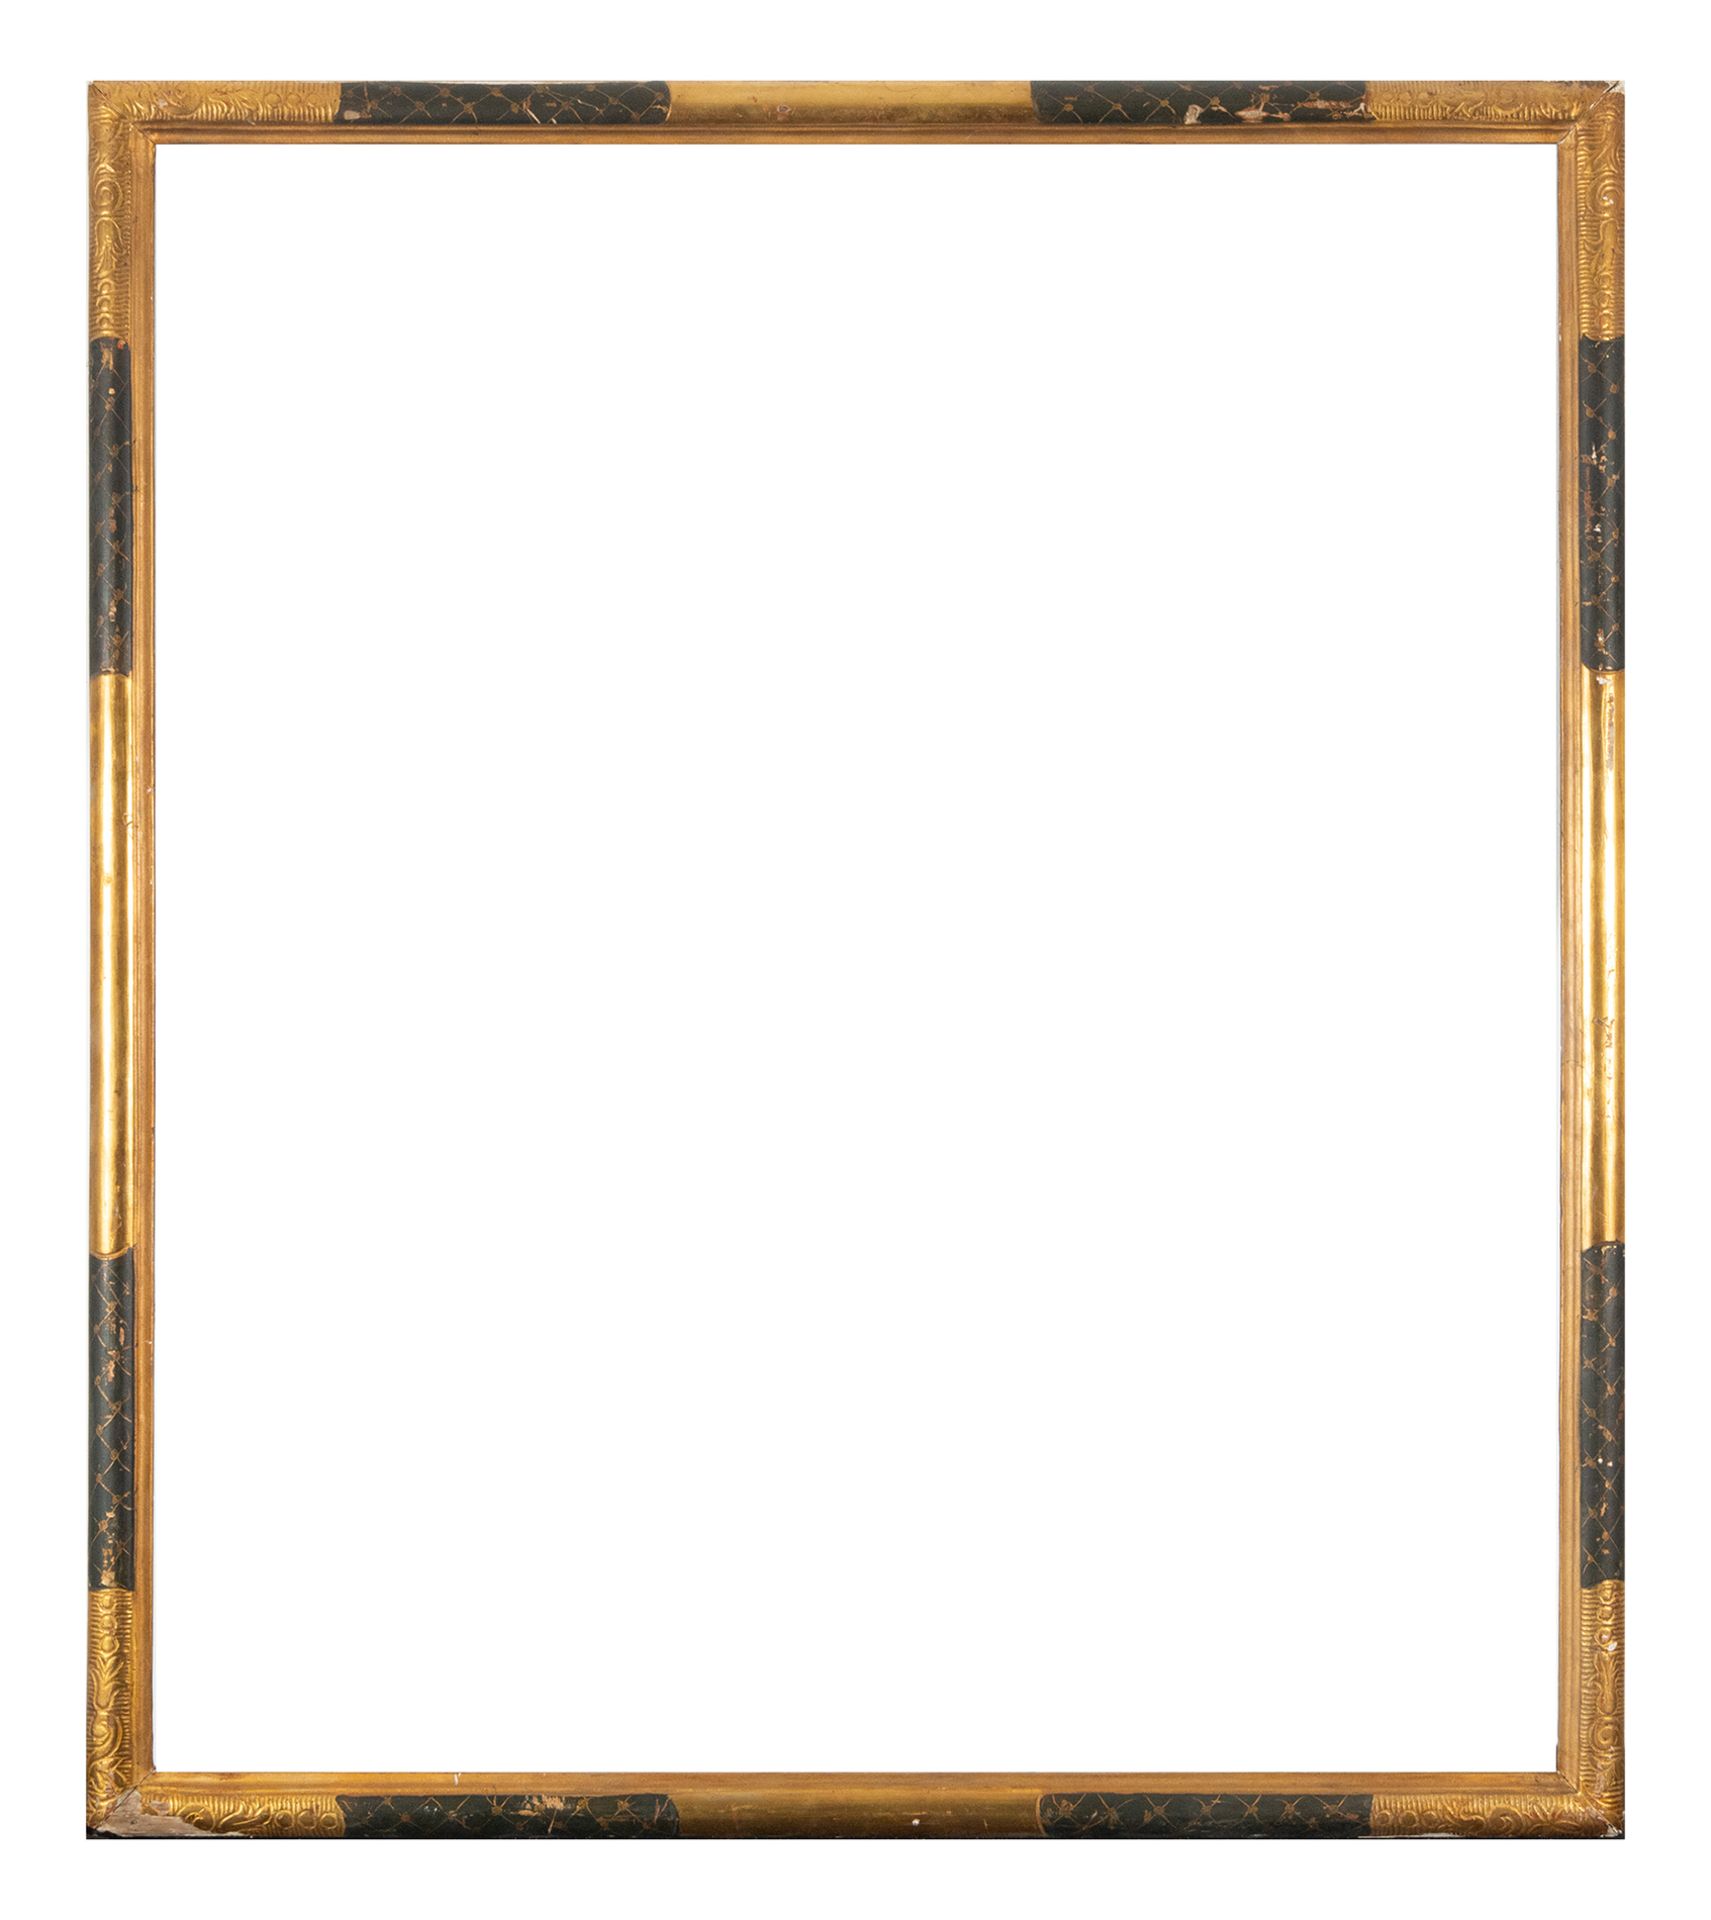 Hispano Flamenco style frame in gilded wood and ebonized and sgraffito stripes, 19th century